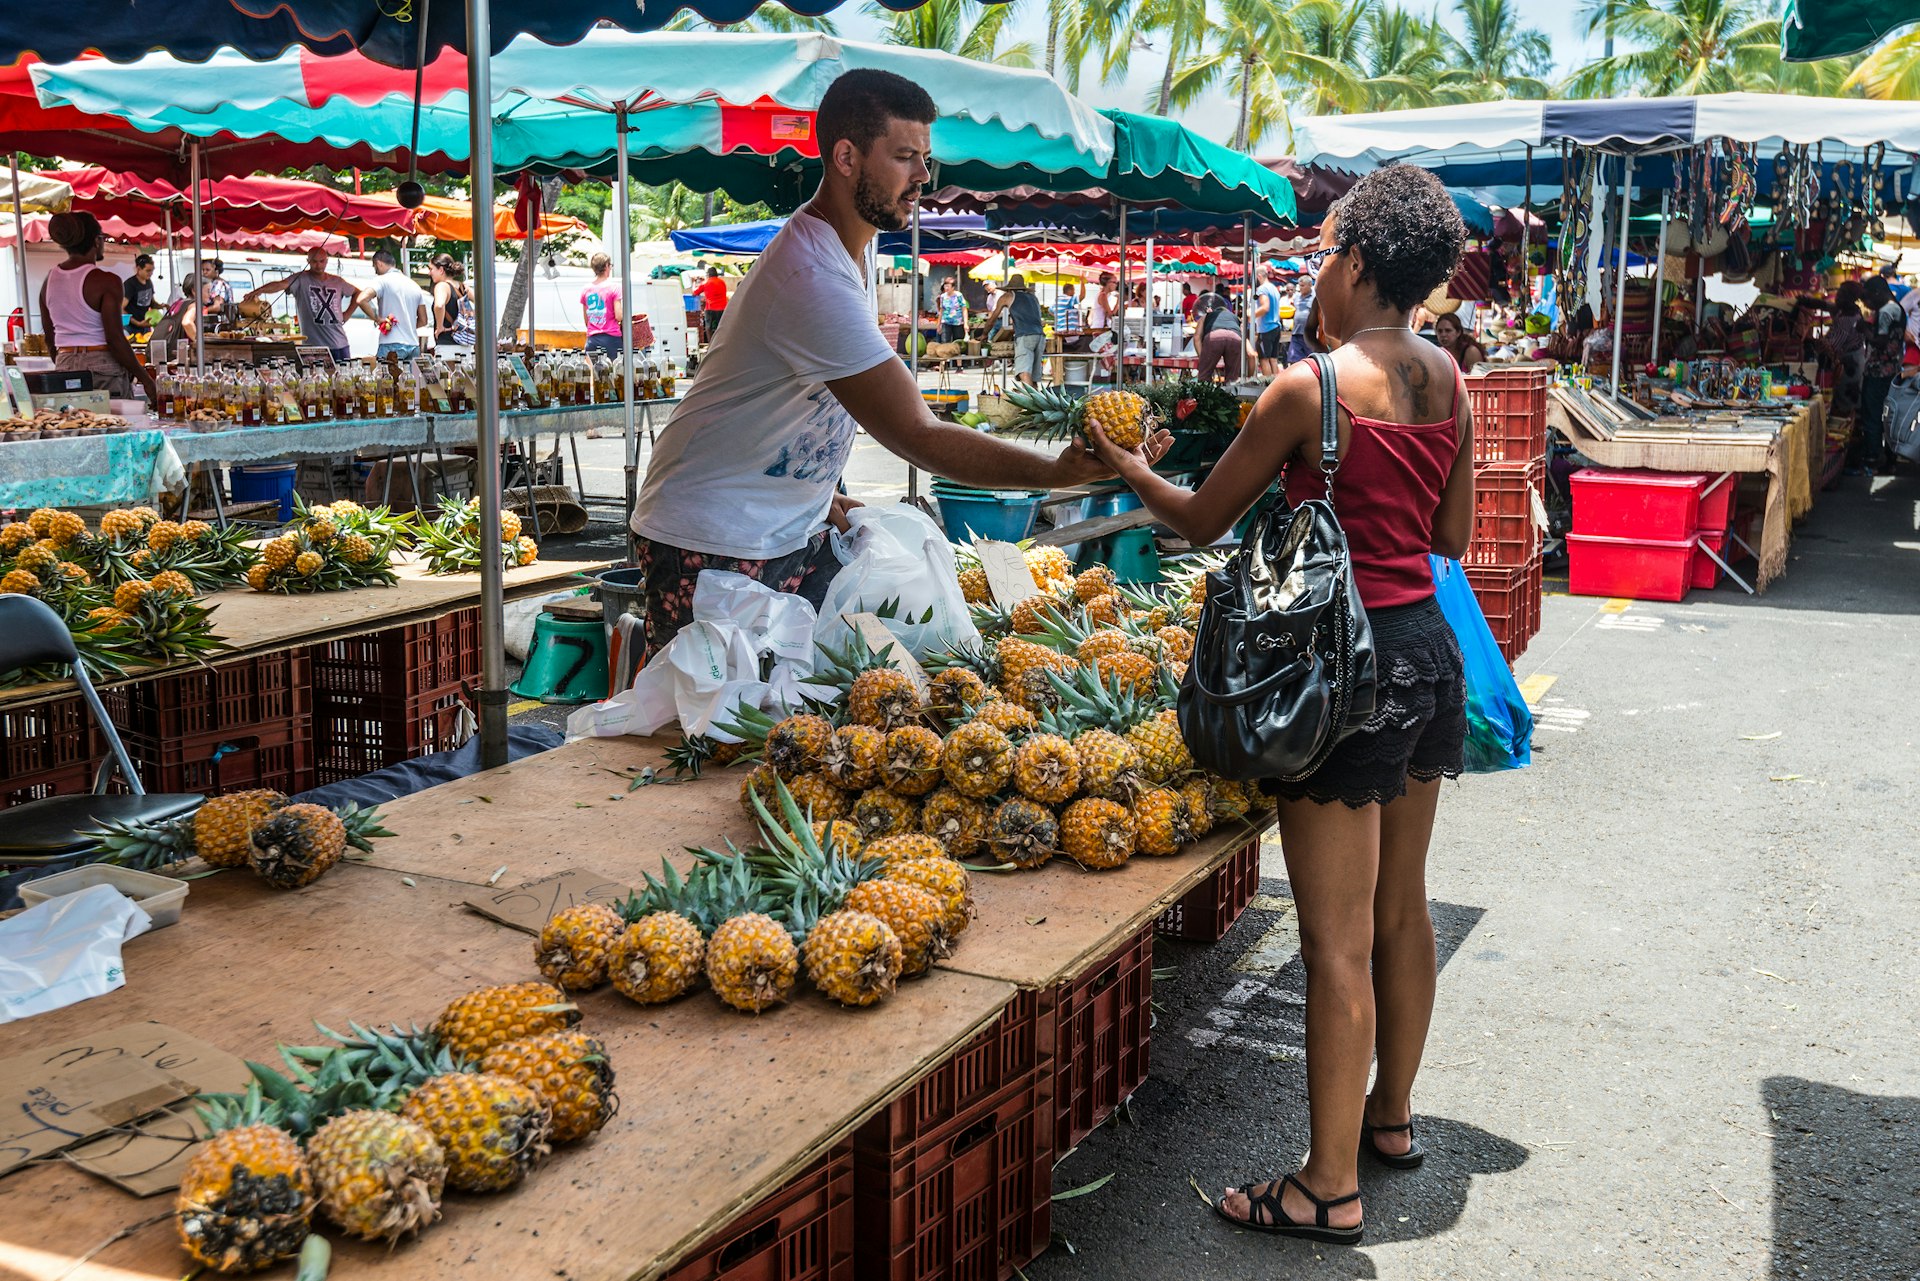 A woman buys a pineapple from a trader at an outdoor market